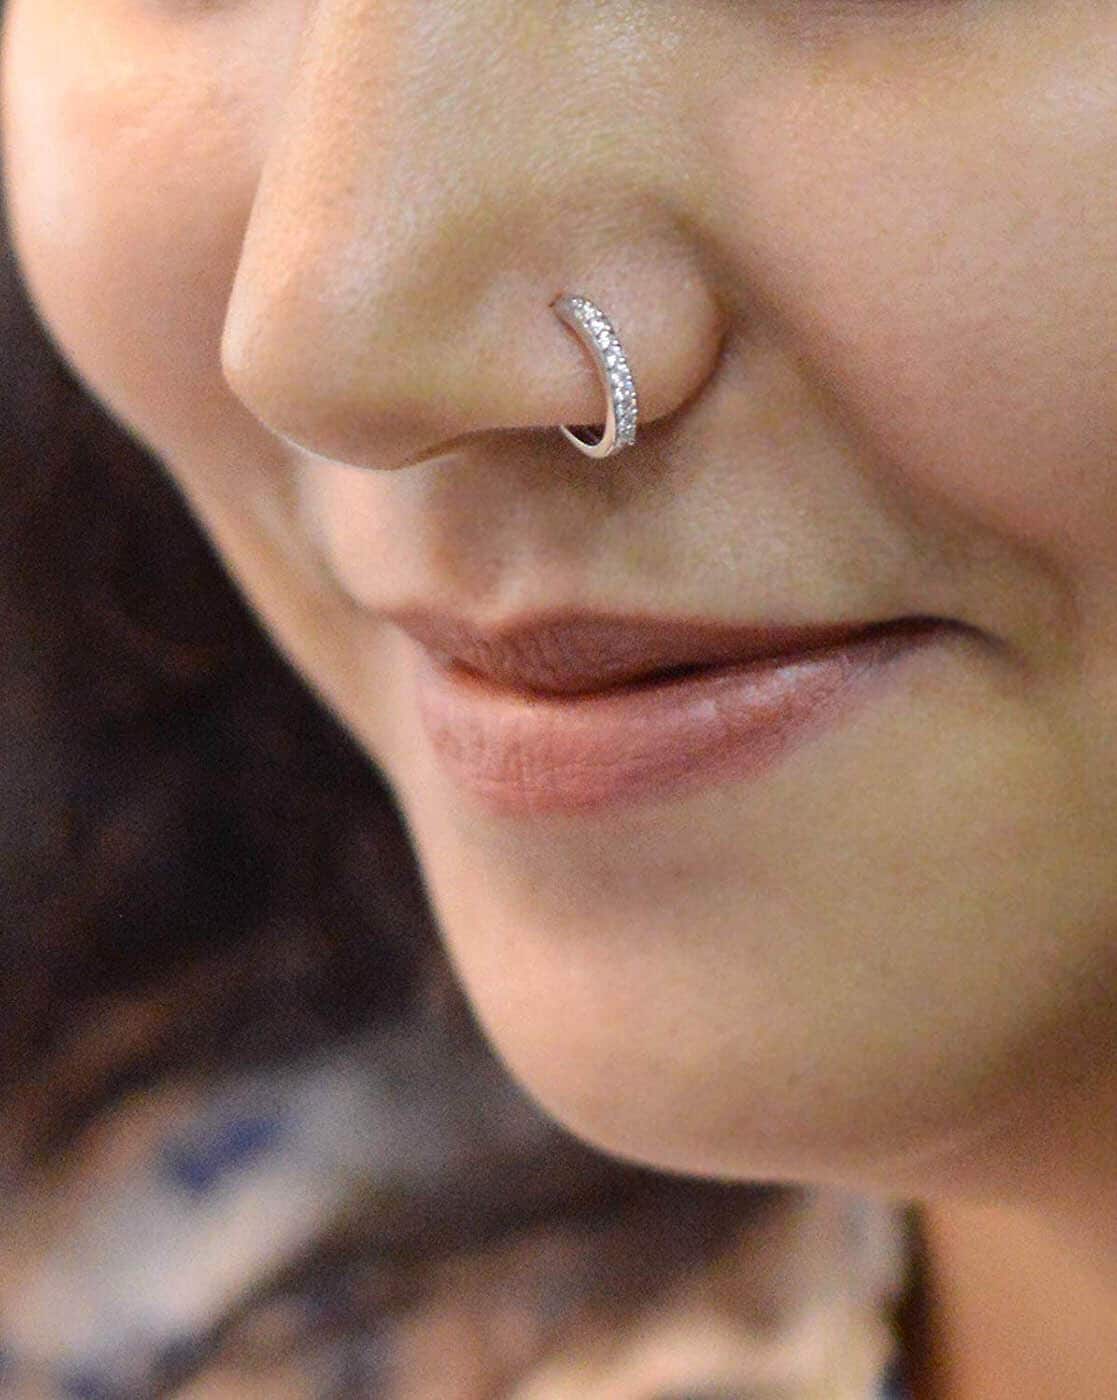 Amazon.com: Tiny Silver Nose Ring – 925 Silver Thin Wire Wrapped Nose  Piercing Hoop - 20 gauge 8mm very Thin Nose Piercings Rings : Handmade  Products